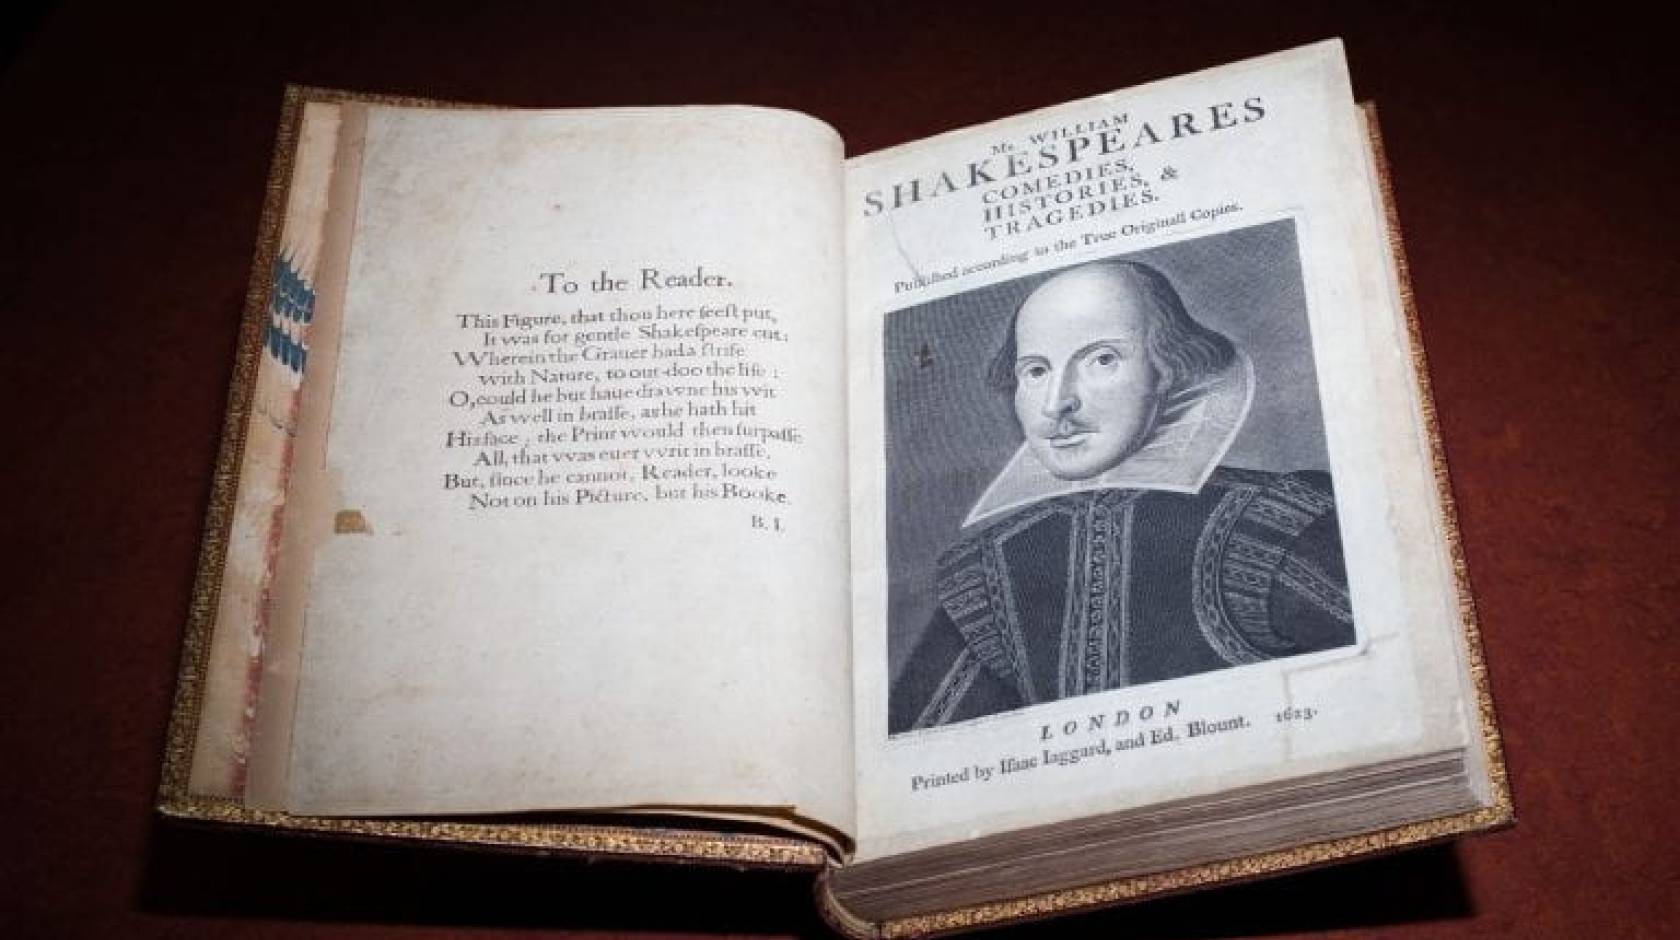 First Folio collection of Shakespeare plays with text on the left page and a portrait of Shakespeare on the right